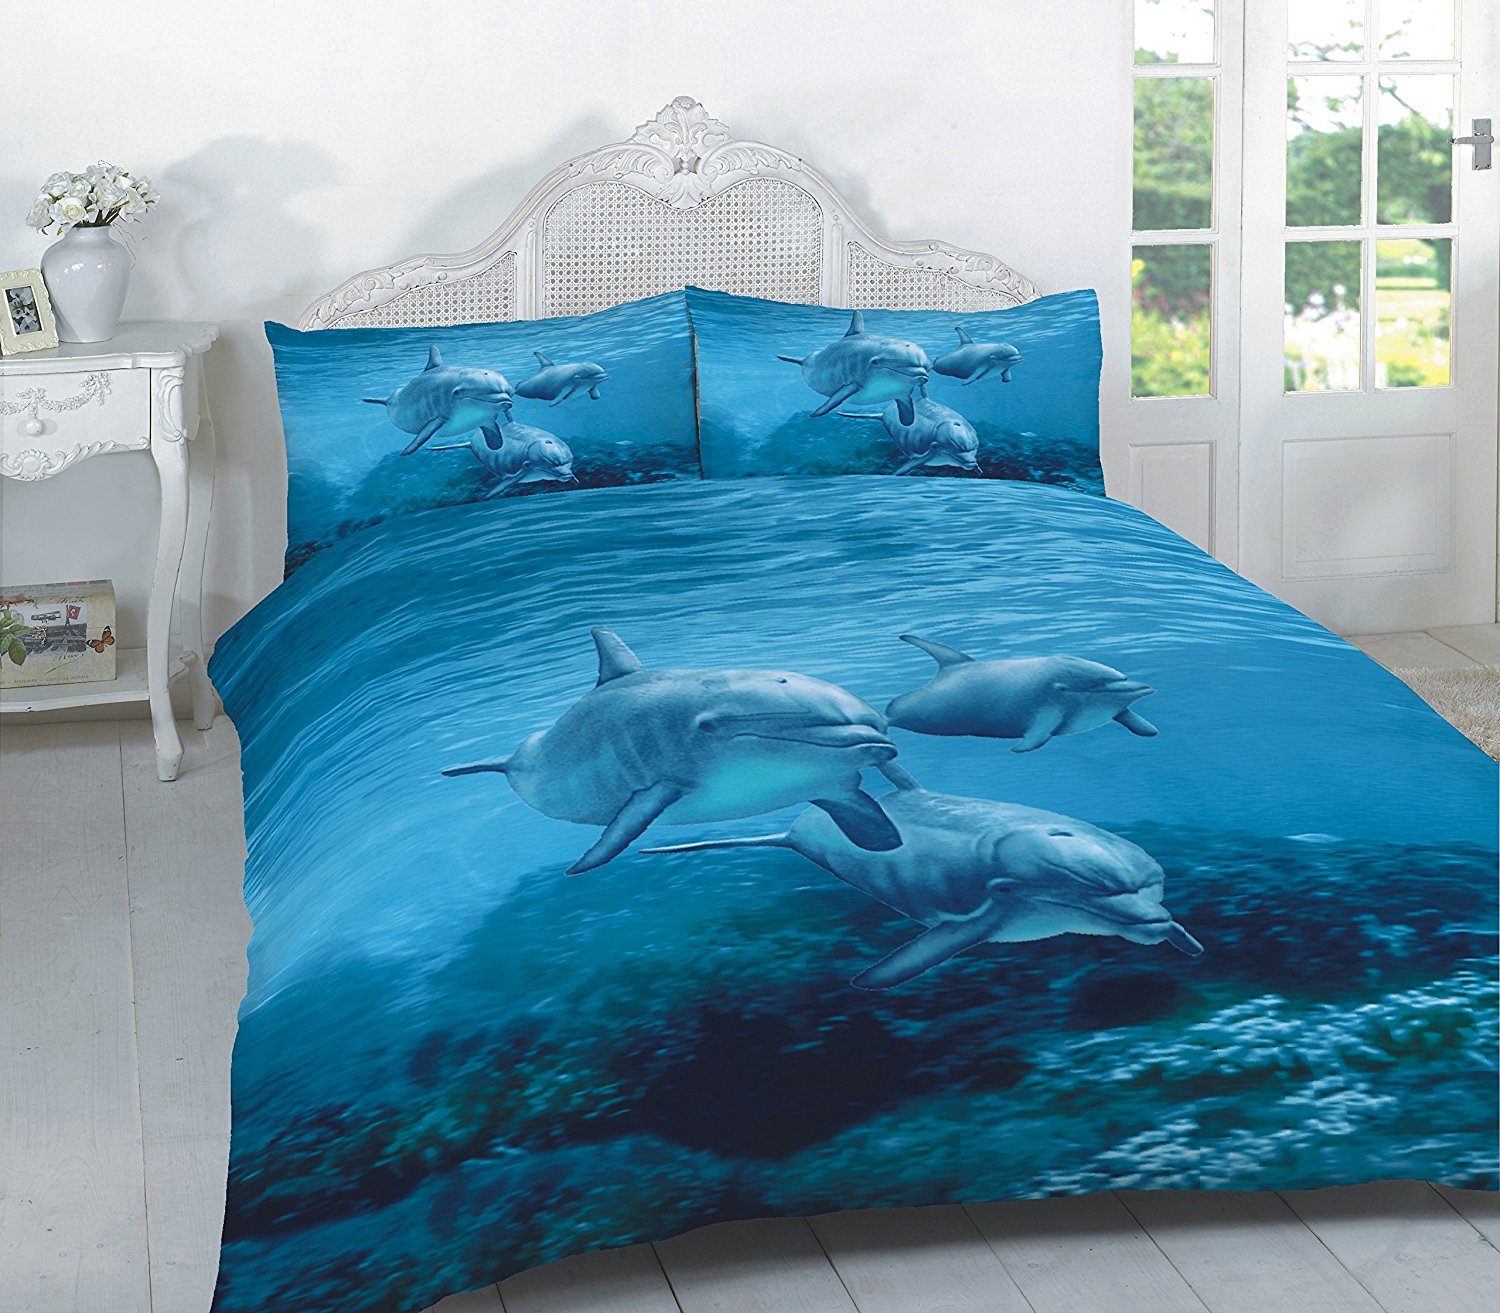 Dolphin 3D Duvet Cover Sets With Pillowcases - Poly Cotton Fabric 3D Bedding